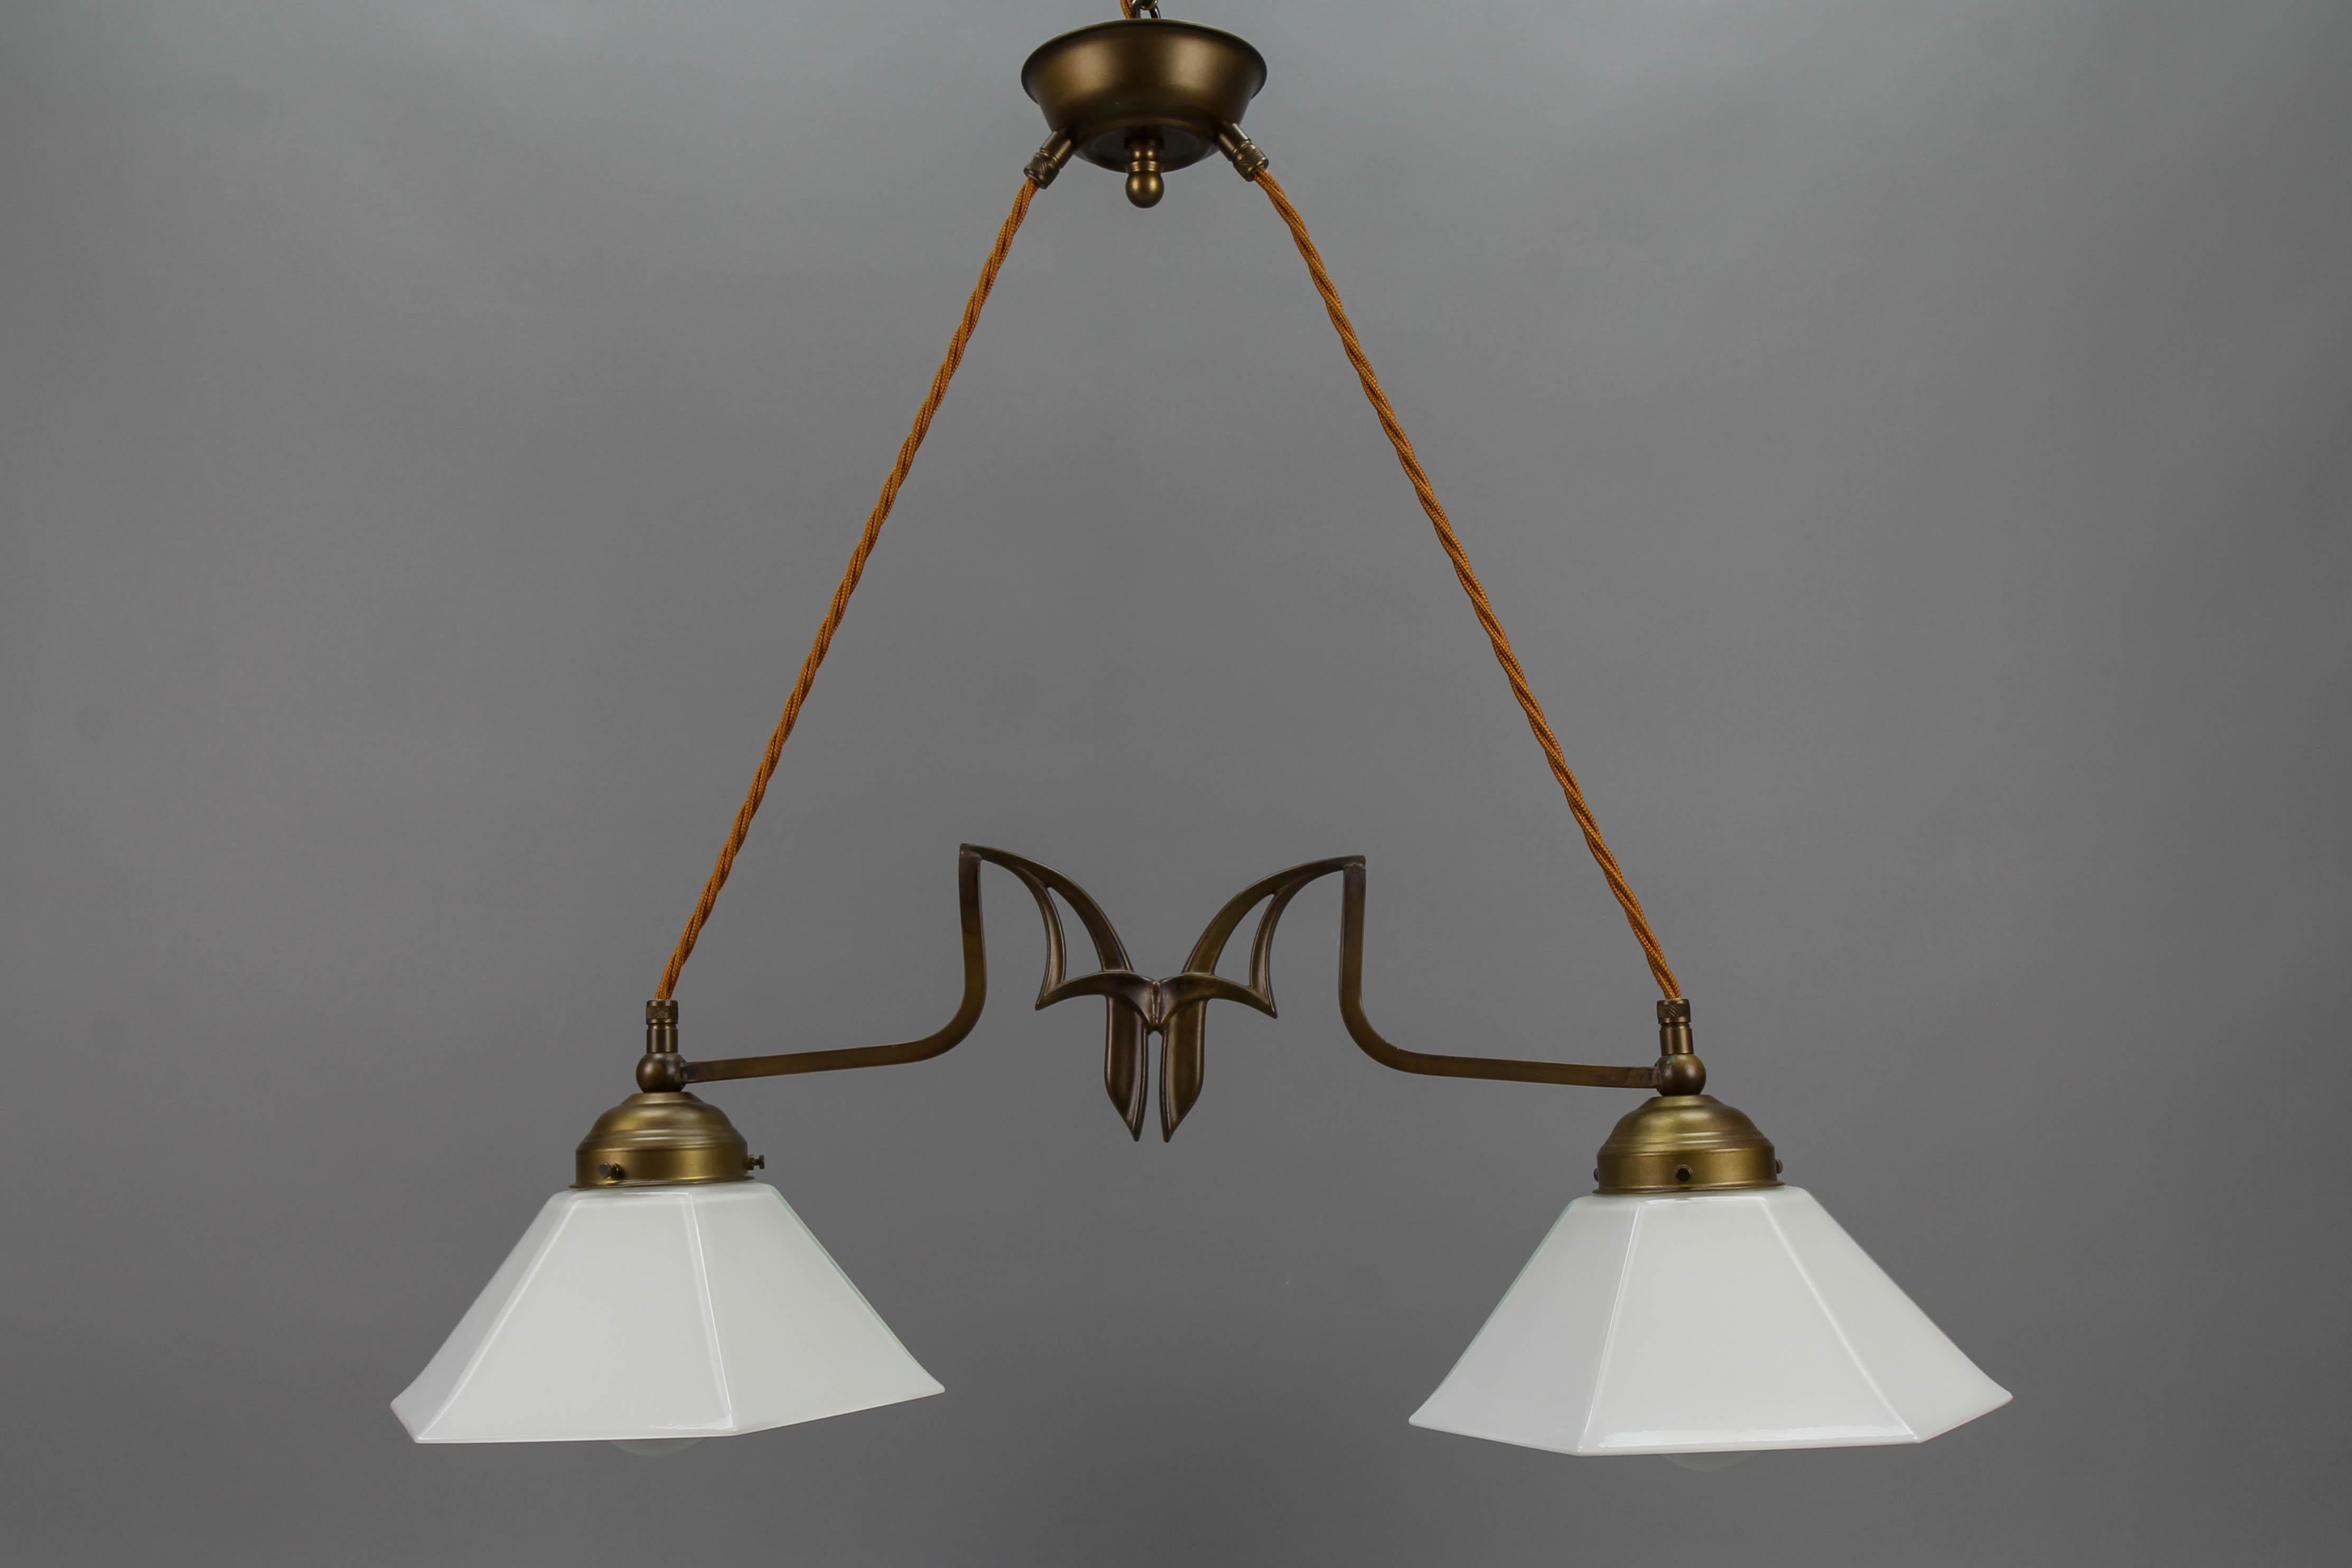 Art Nouveau style brass and white glass two-light pendant chandelier, Germany, circa the 1950s.
This elegant Art Nouveau-style pendant light fixture features two white glass hexagonal lampshades and a brass frame with a refined Art Nouveau-style